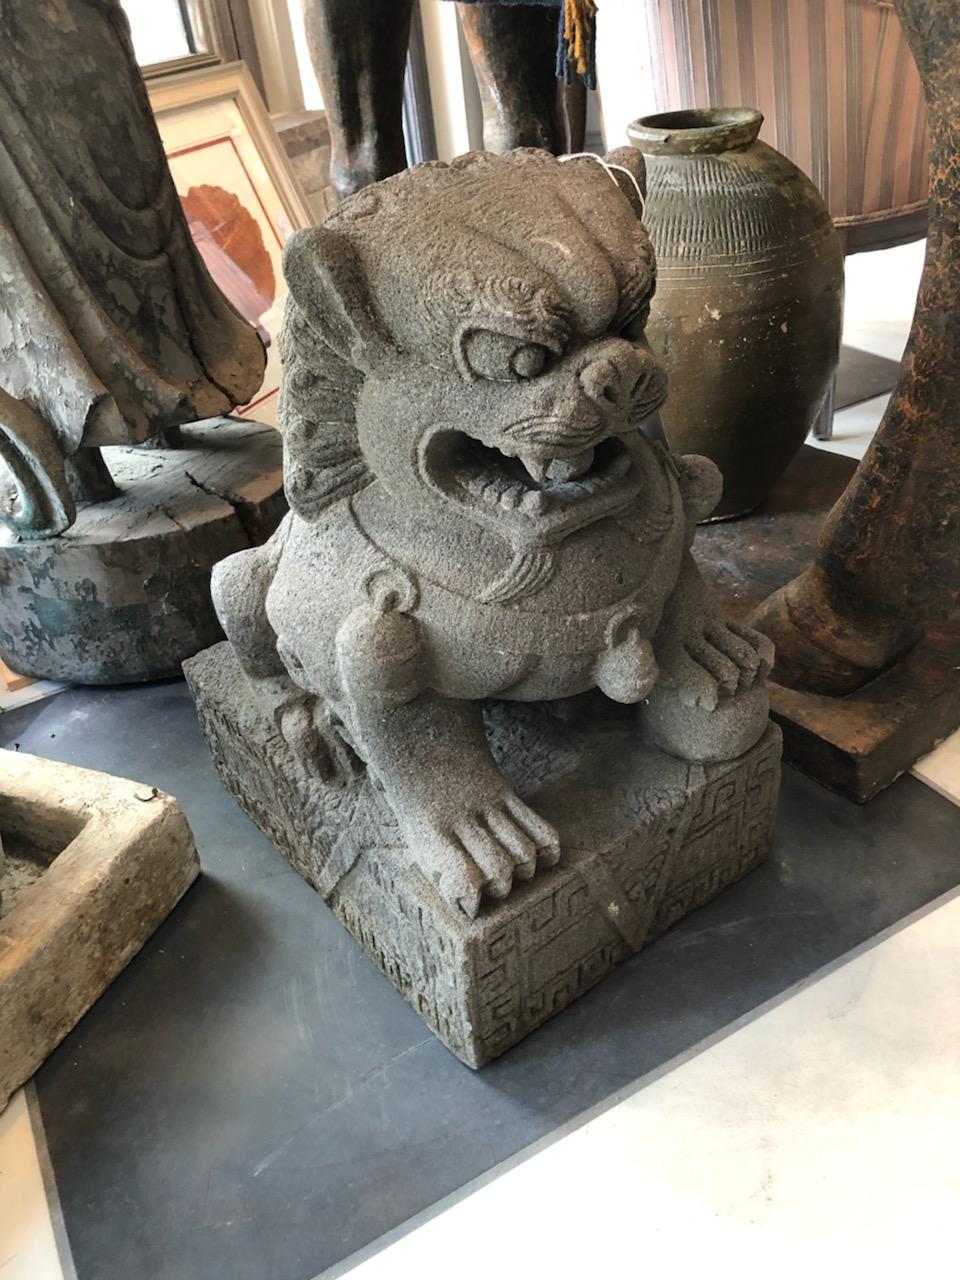 This foo/guard dog from Chinese has his foot 